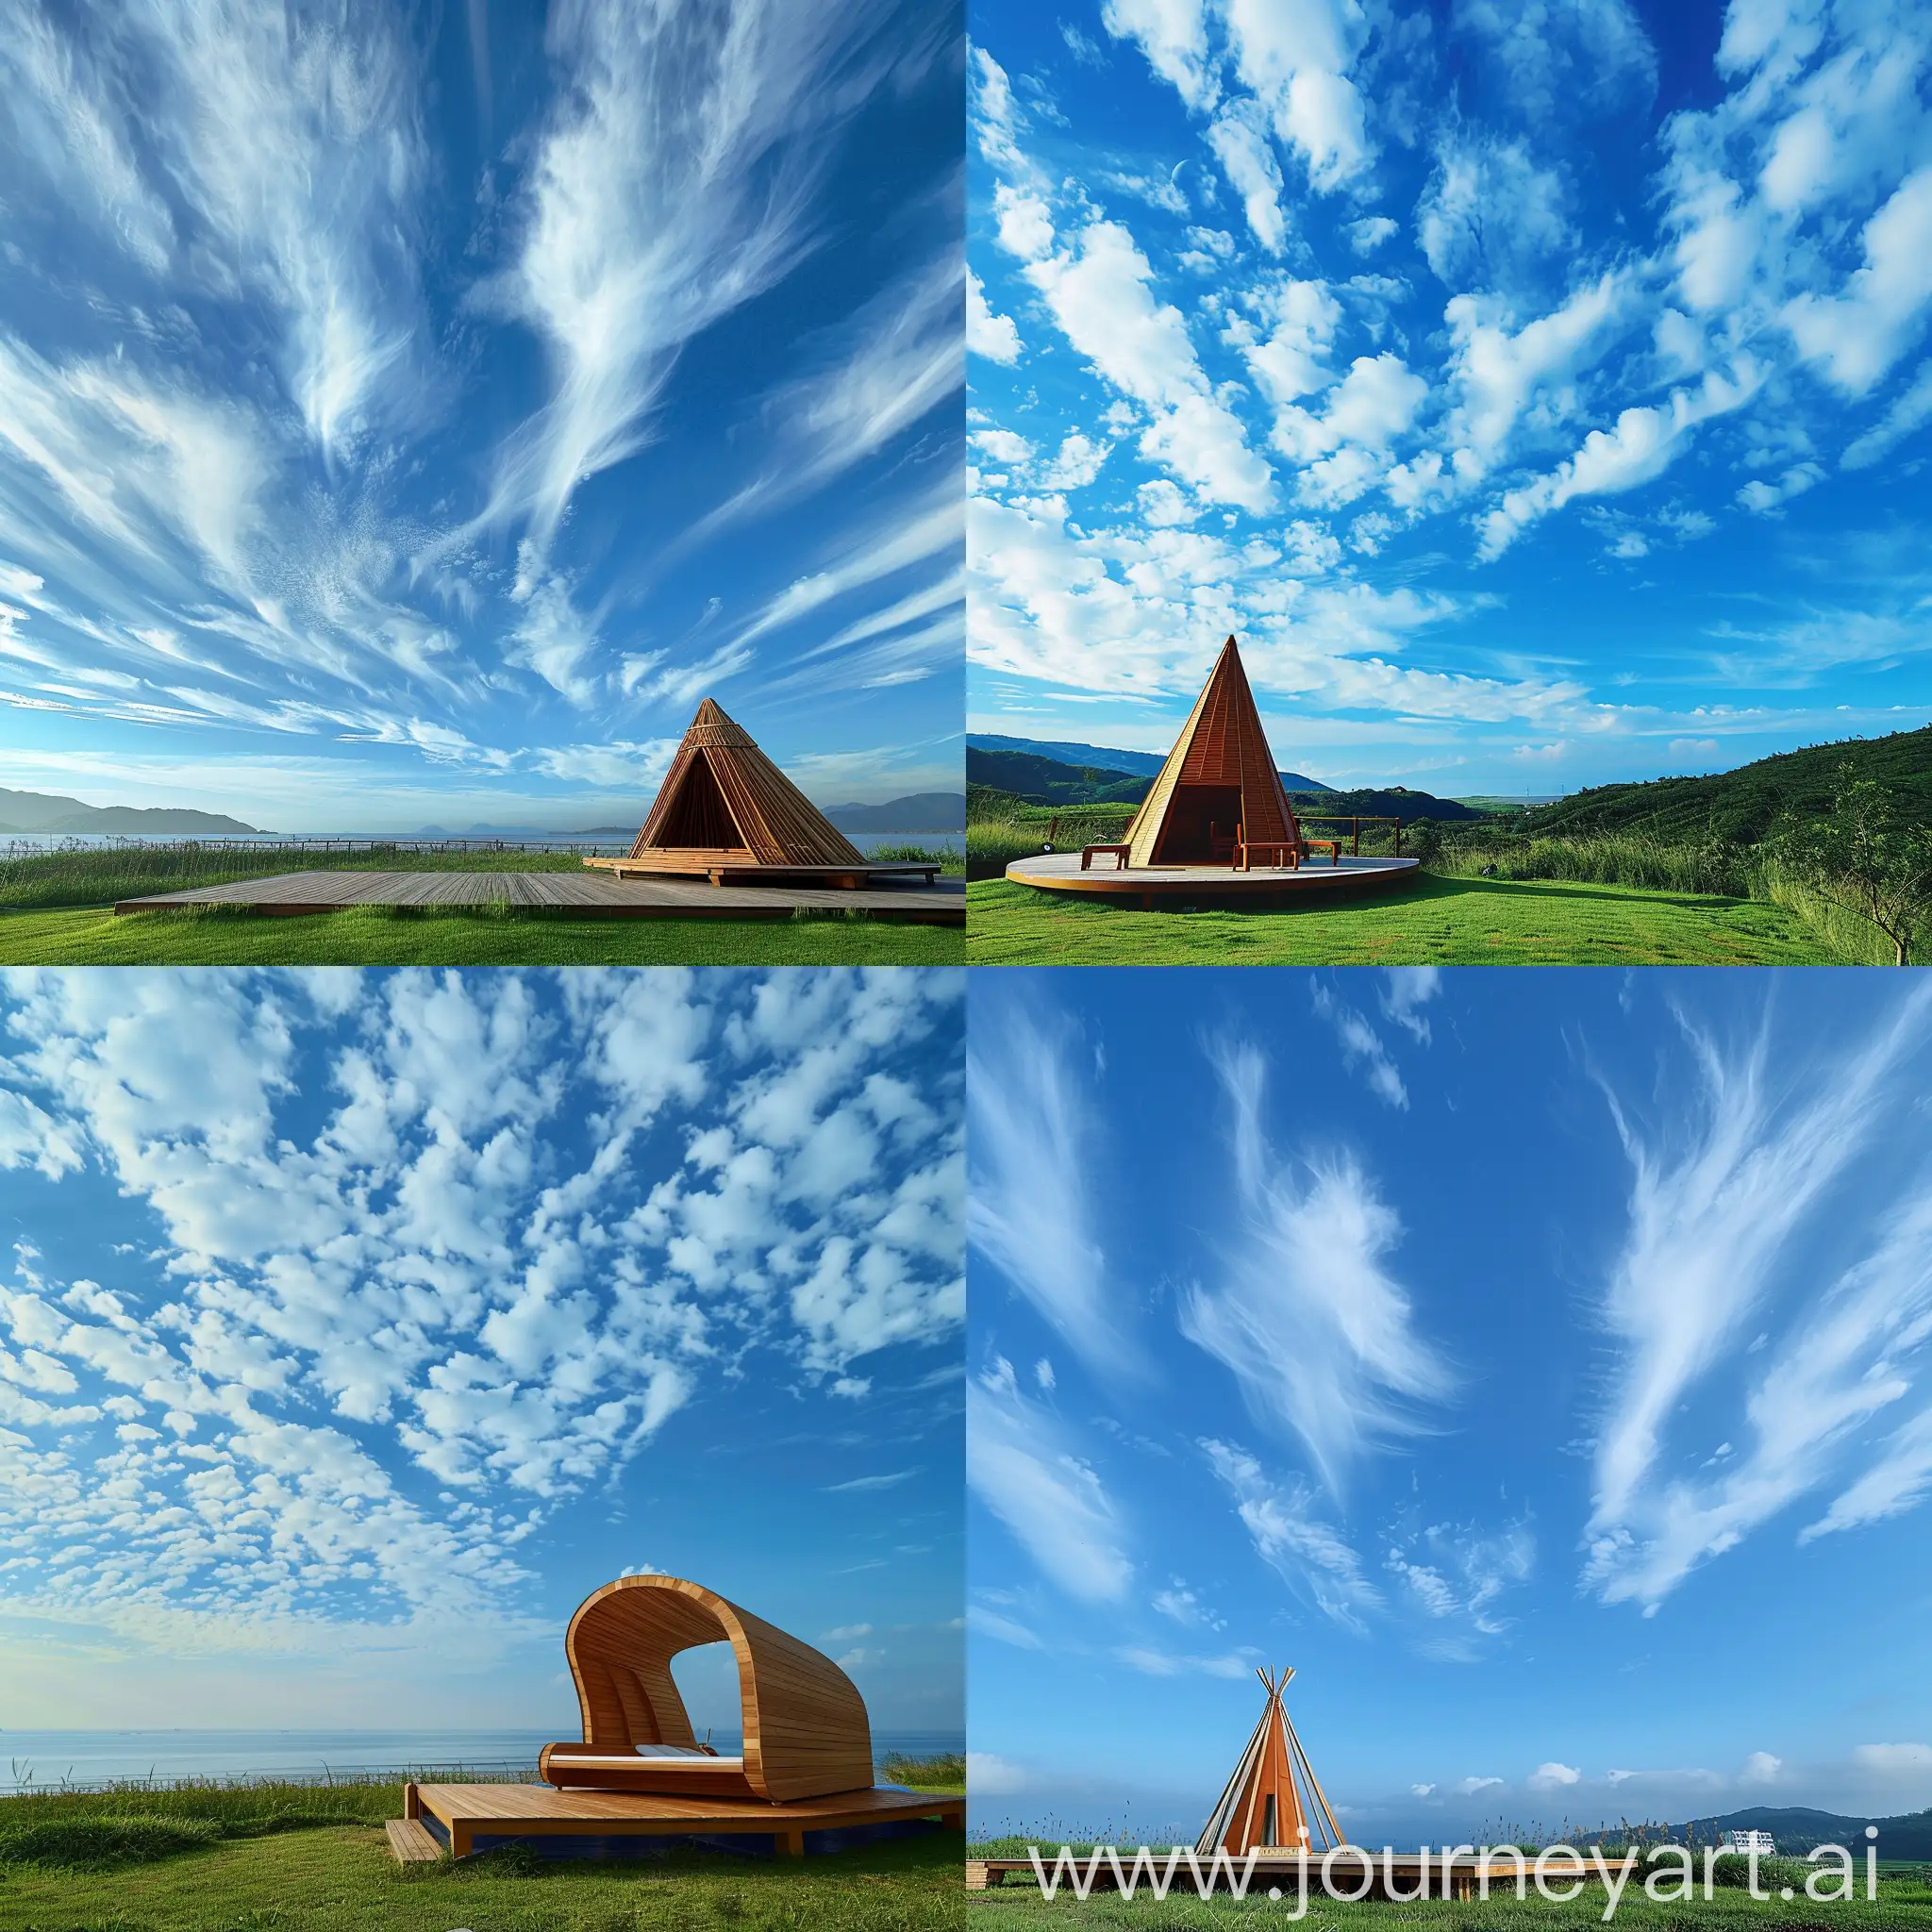 Luxurious-Wild-Wooden-Hotel-Tent-on-Green-Grass-with-Blue-Sky-and-Drifting-White-Clouds